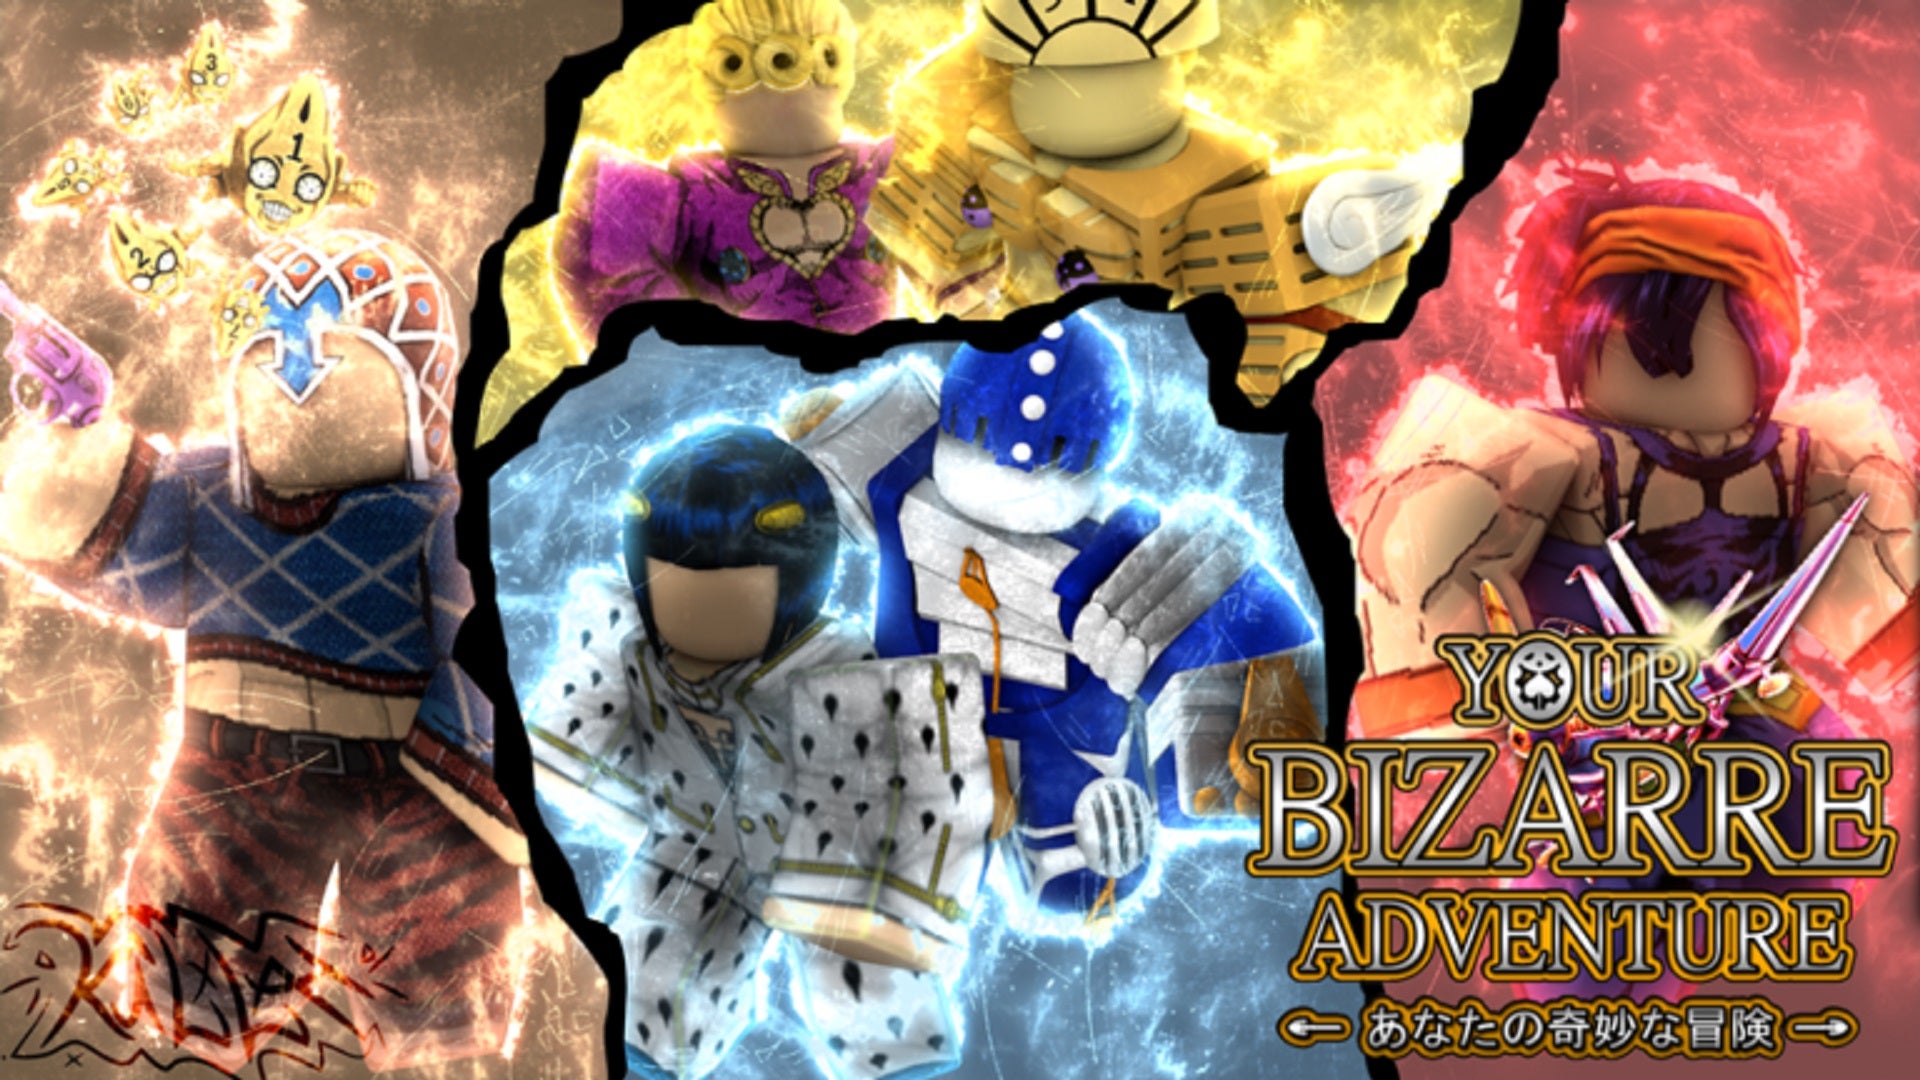 The Roblox banner image for Your Bizarre Adventure, featuring several Roblox characters with designs inspired by the manga JoJo's Bizarre Adventure.